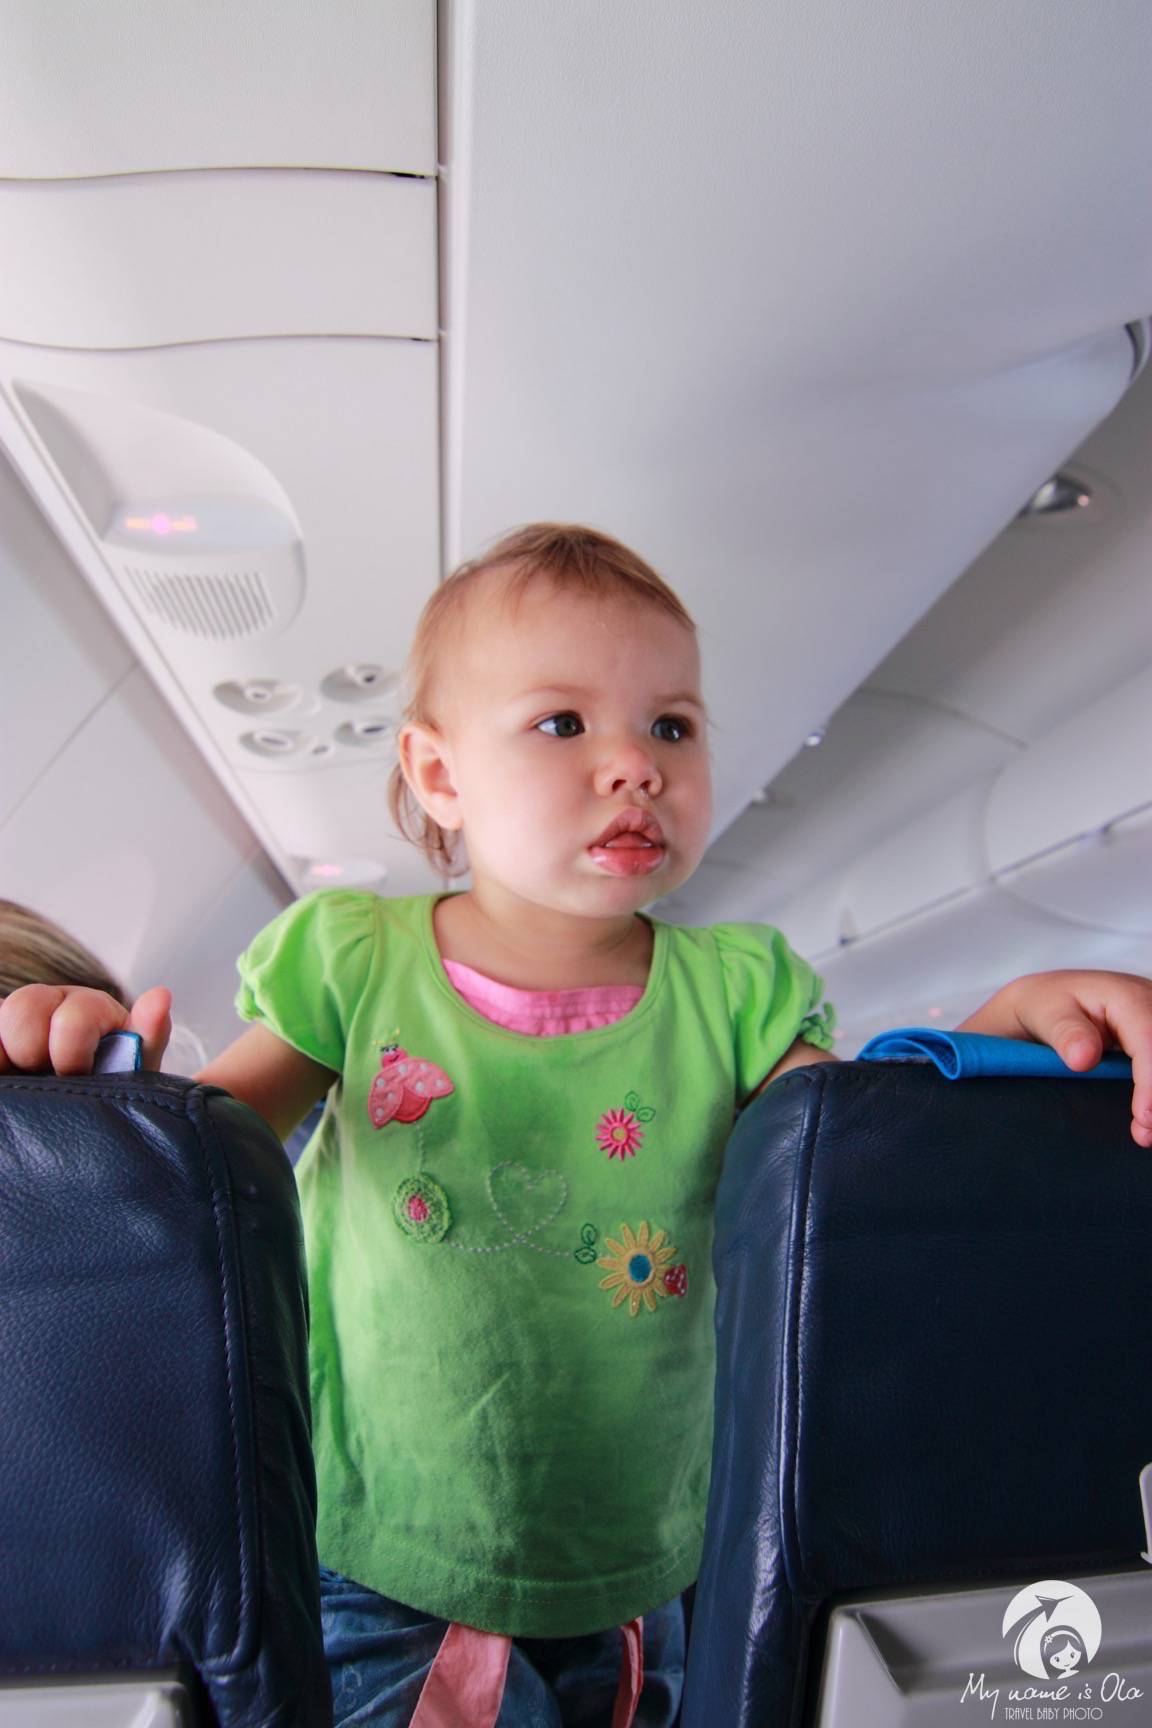 Baby on the plane